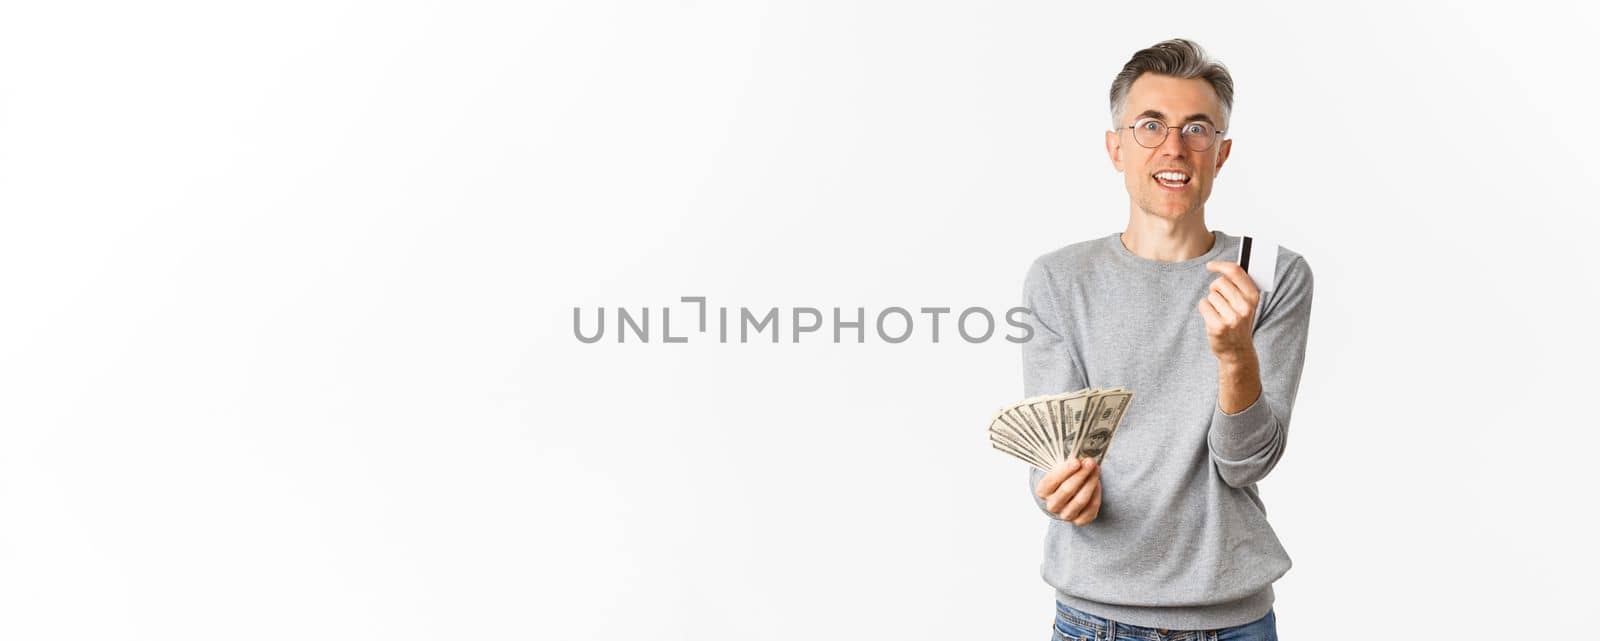 Portrait of excited middle-aged man looking amazed, holding money and showing credit card, standing over white background.